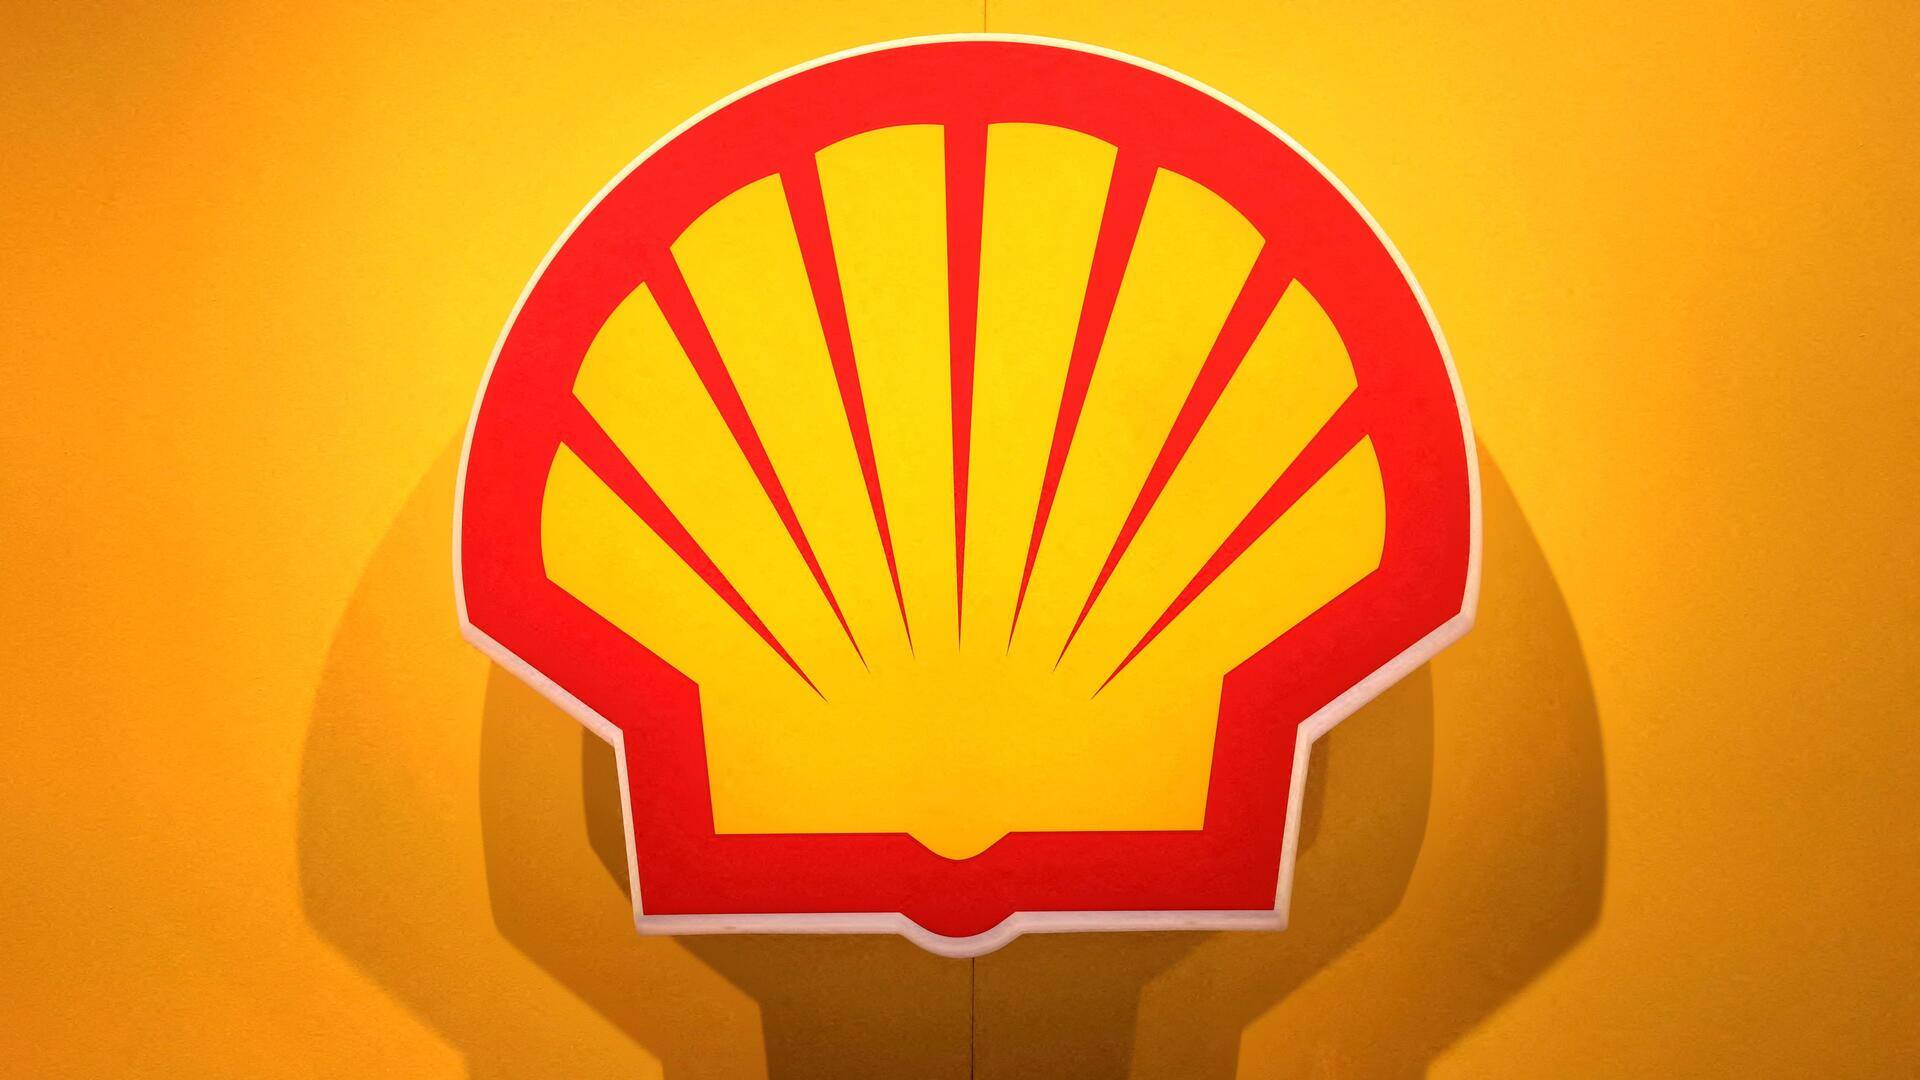 Shell to cut its low-carbon solutions workforce by 15%